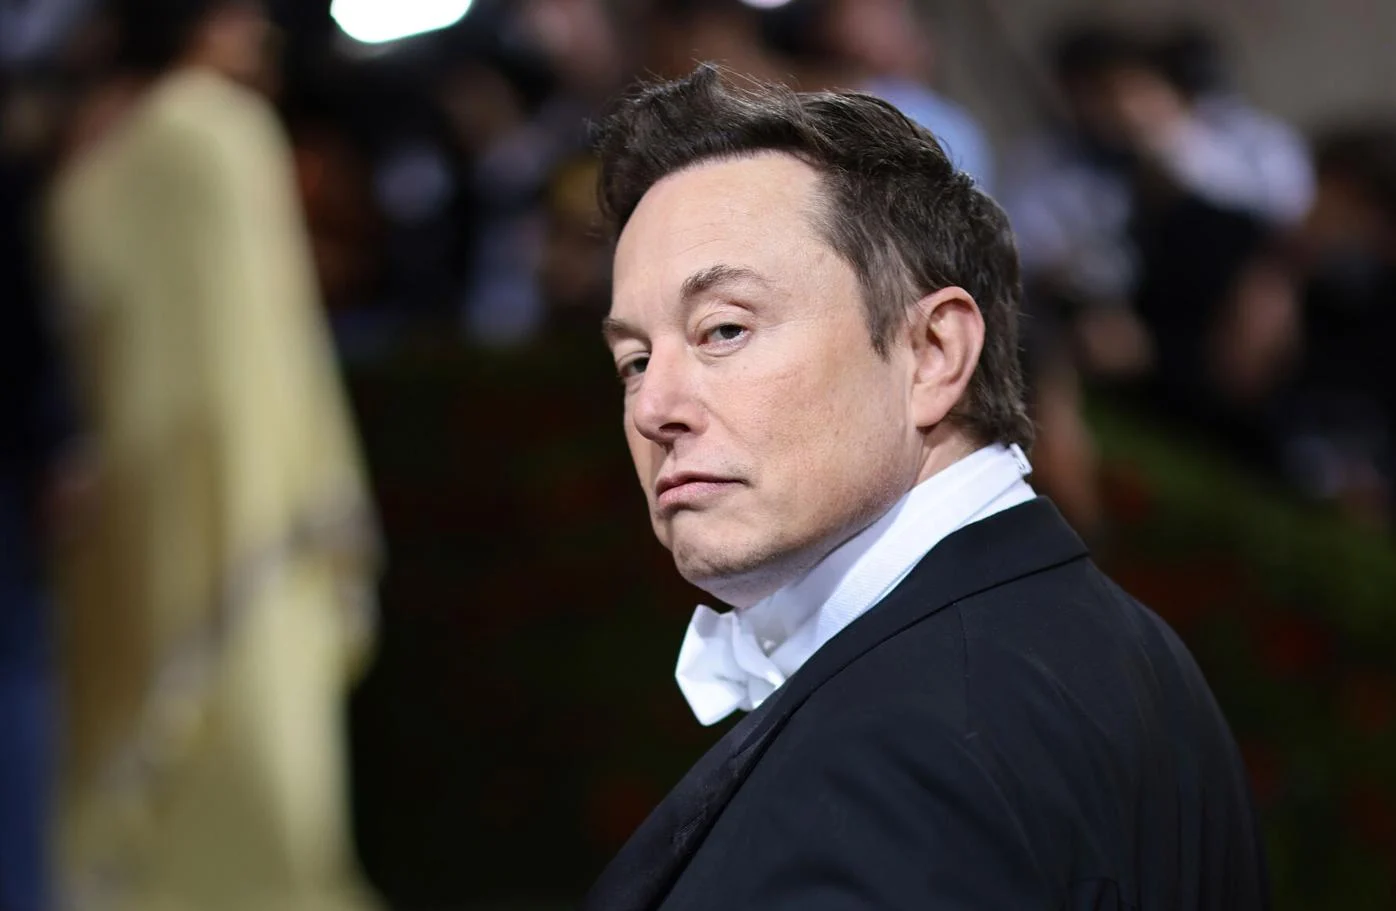 Recently Elon Musk’s $56 Billion Pay Package Was Voided, Know His Reaction After That